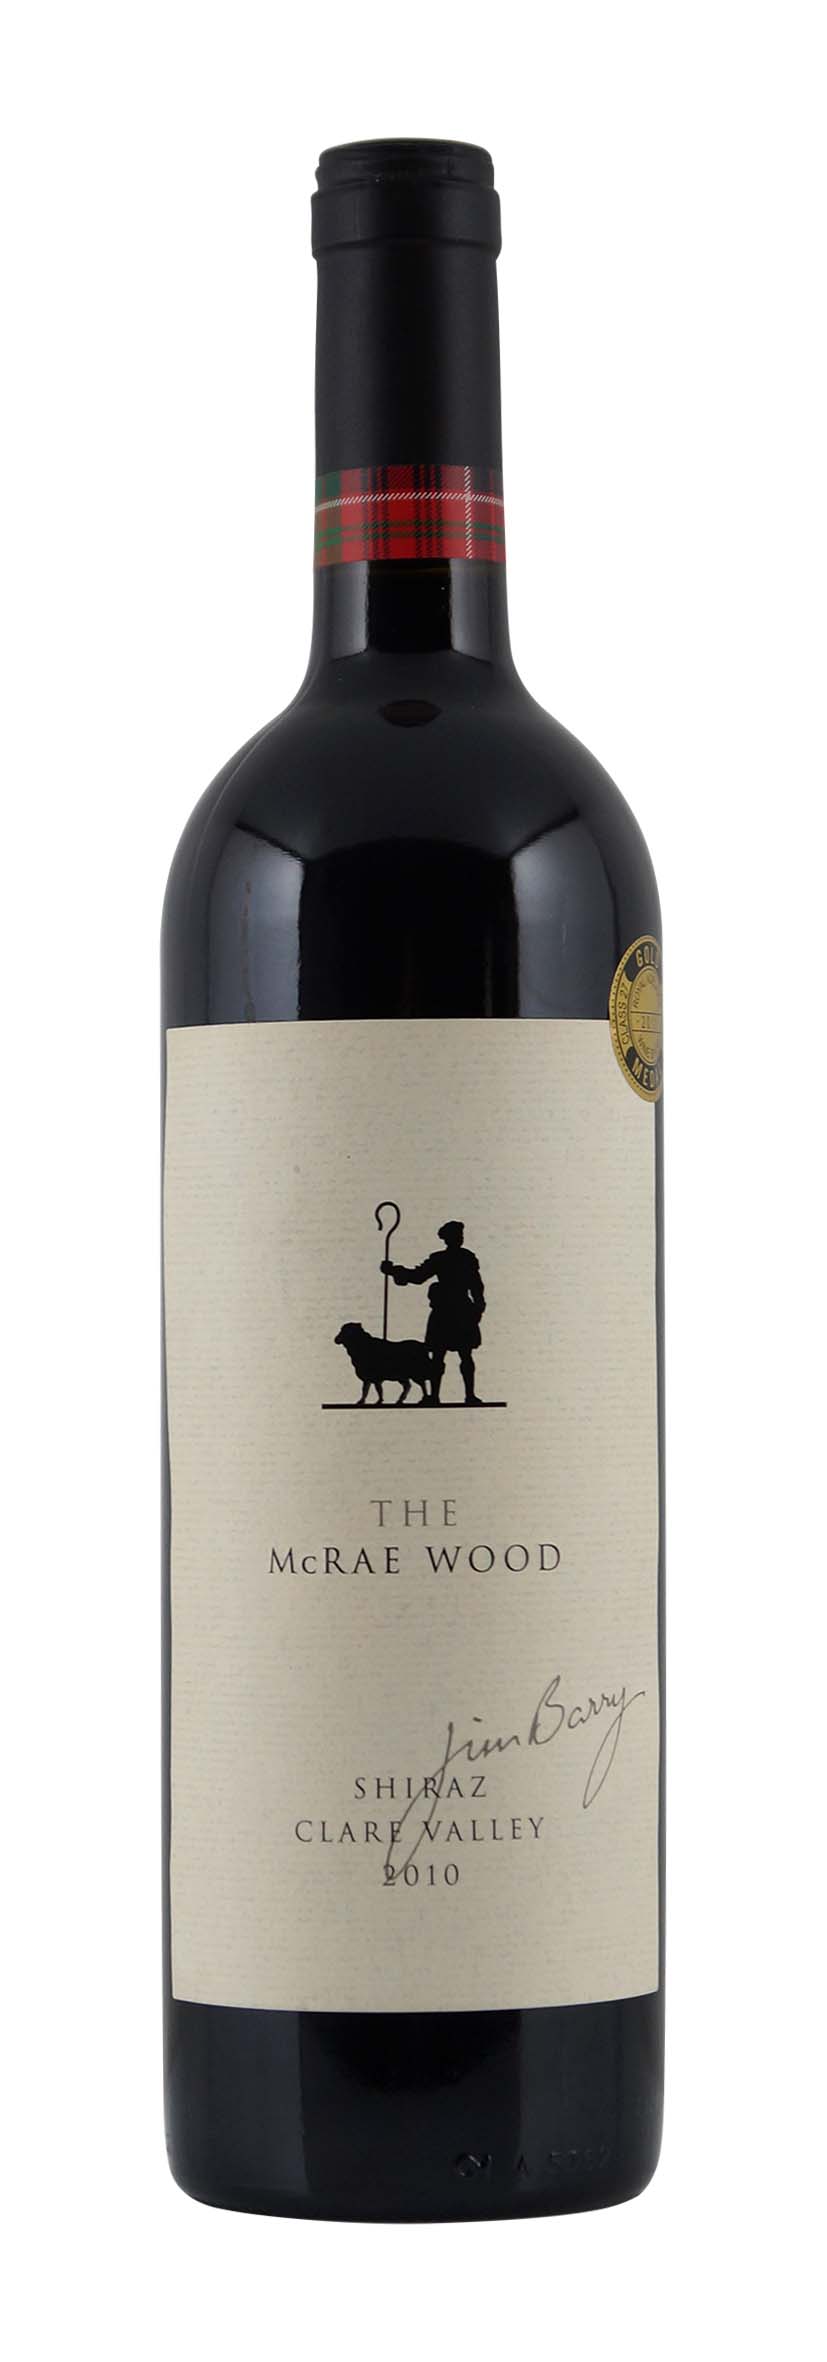 Clare Valley The Mc Rae Wood 2010